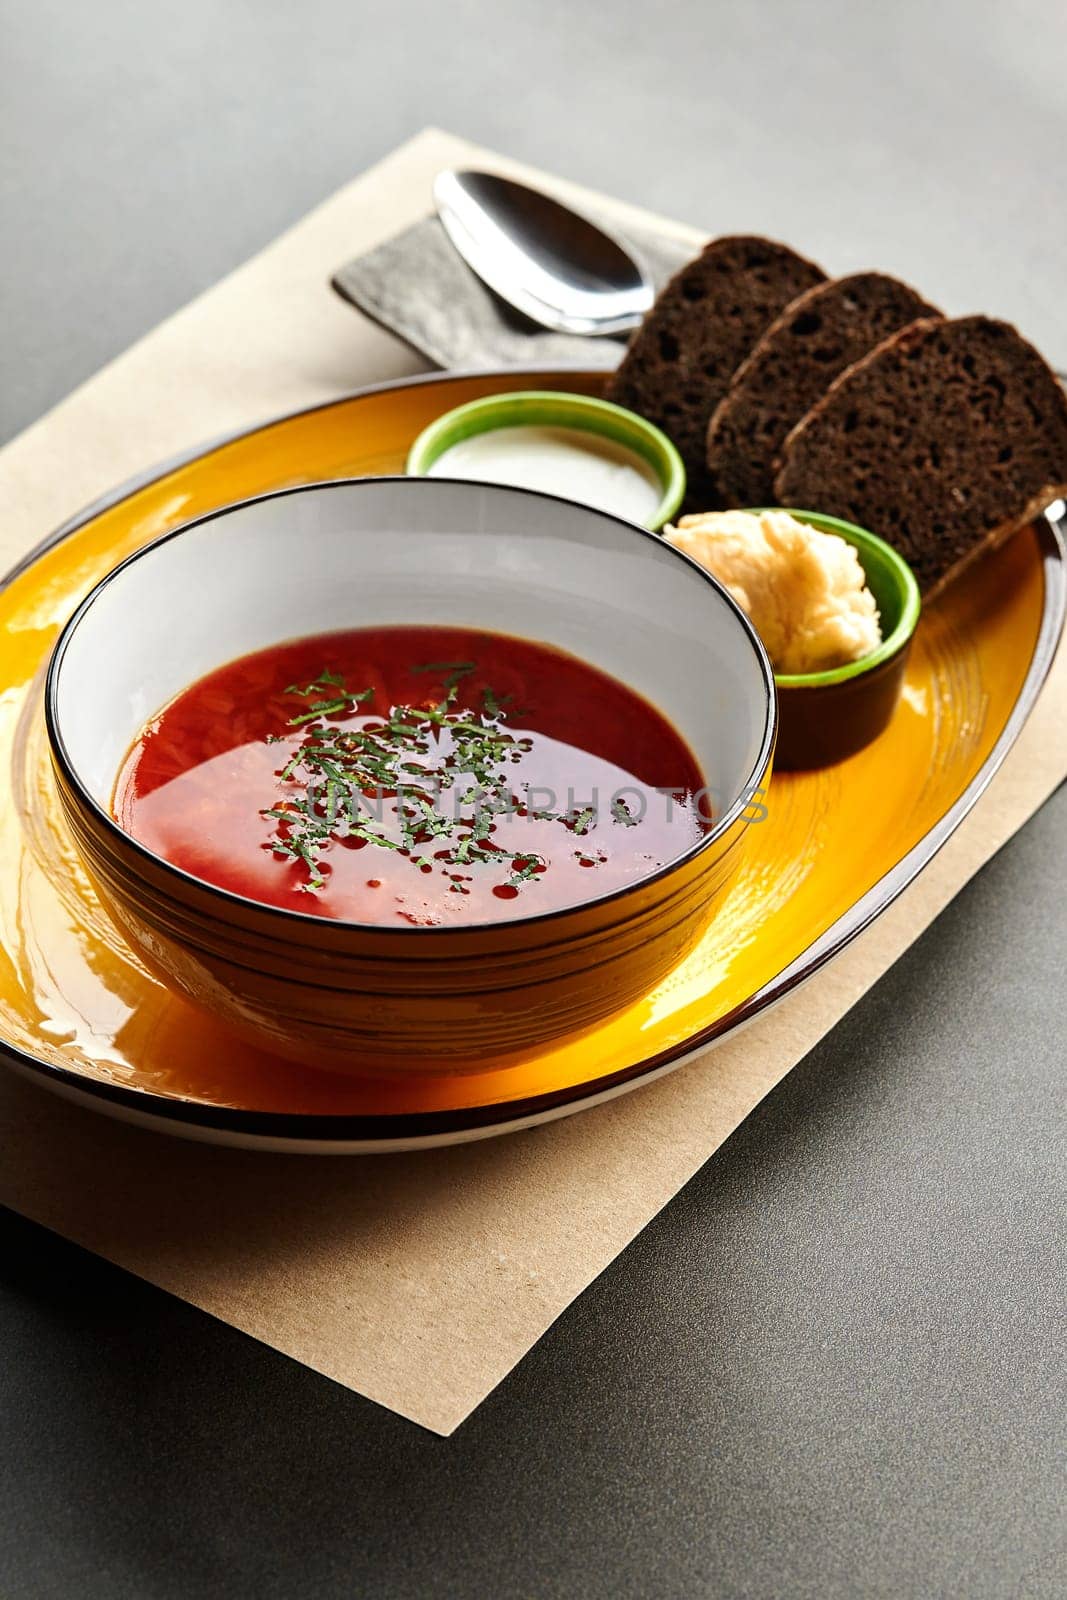 Traditional Ukrainian borscht with rye bread, sour cream, and condiments by nazarovsergey